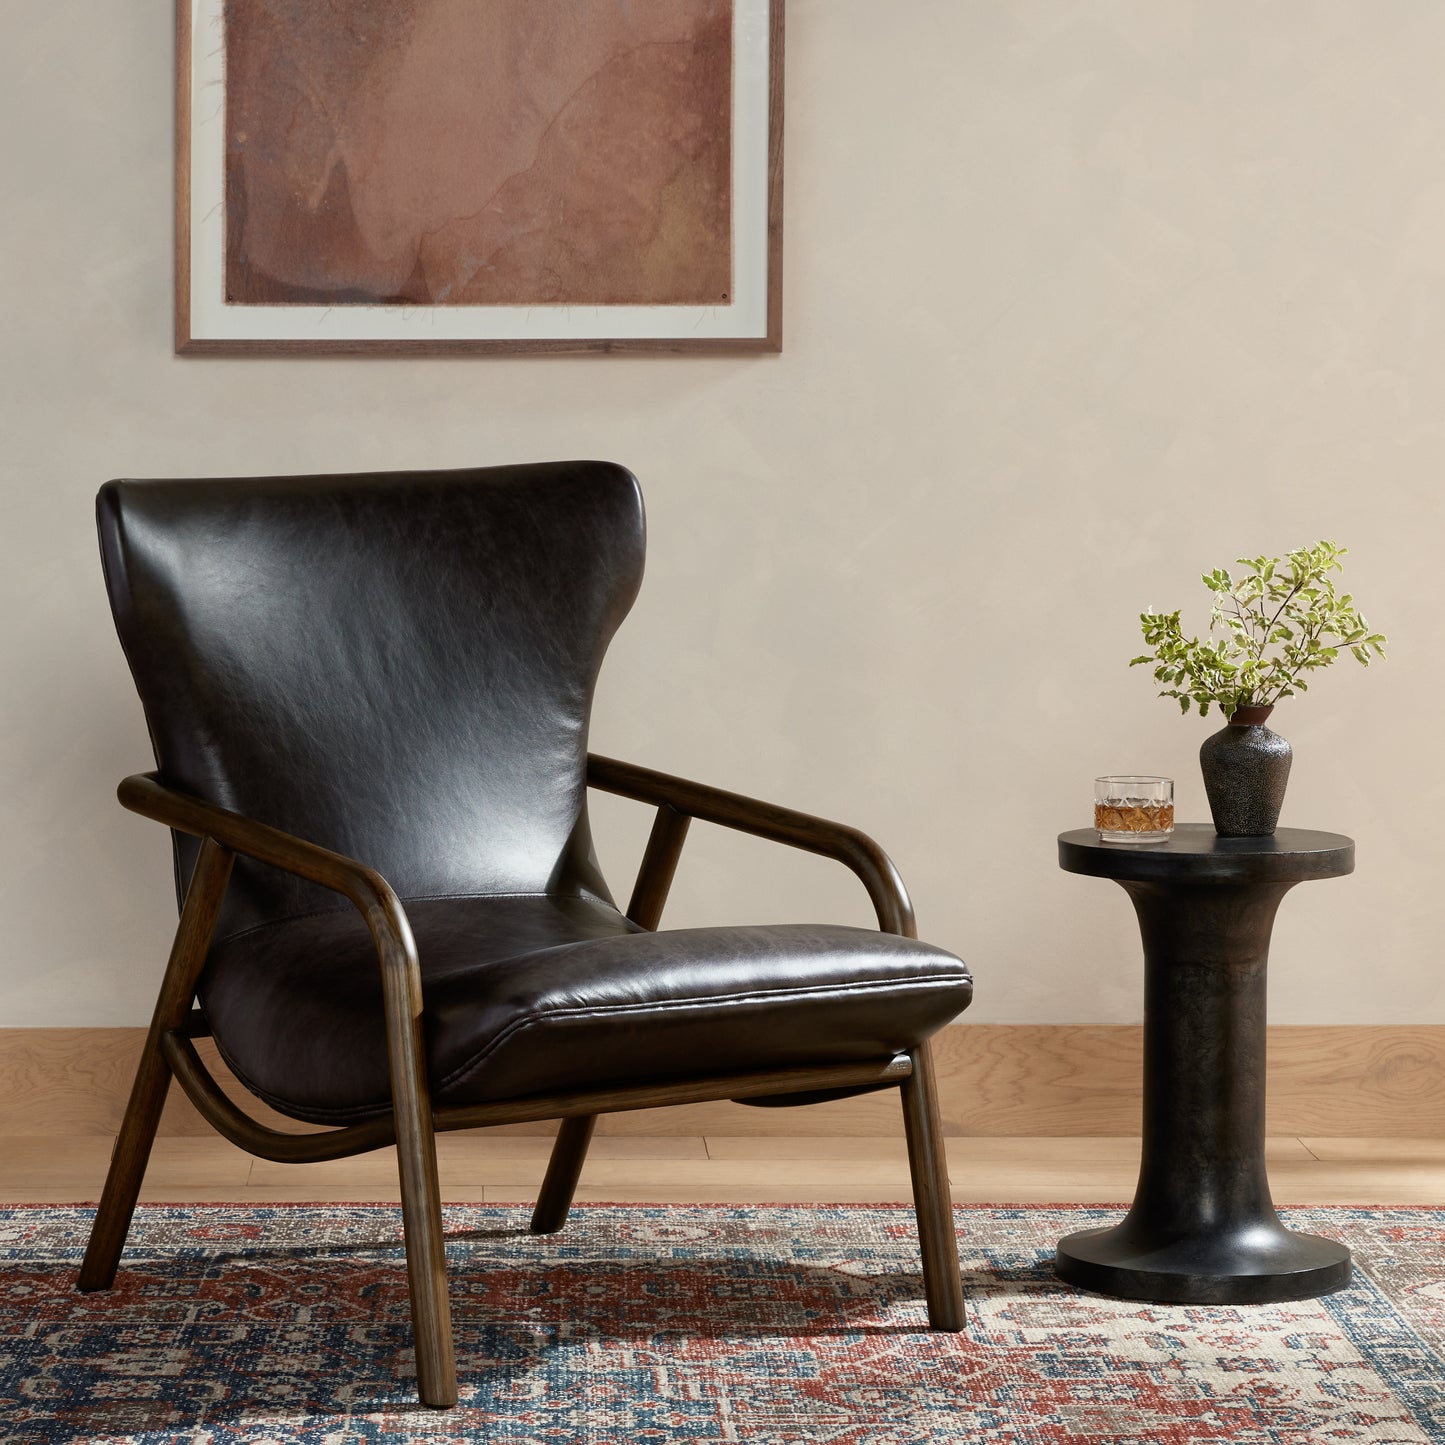 Load image into Gallery viewer, Vance Chair Lounge Chair Four Hands     Four Hands, Mid Century Modern Furniture, Old Bones Furniture Company, Old Bones Co, Modern Mid Century, Designer Furniture, https://www.oldbonesco.com/
